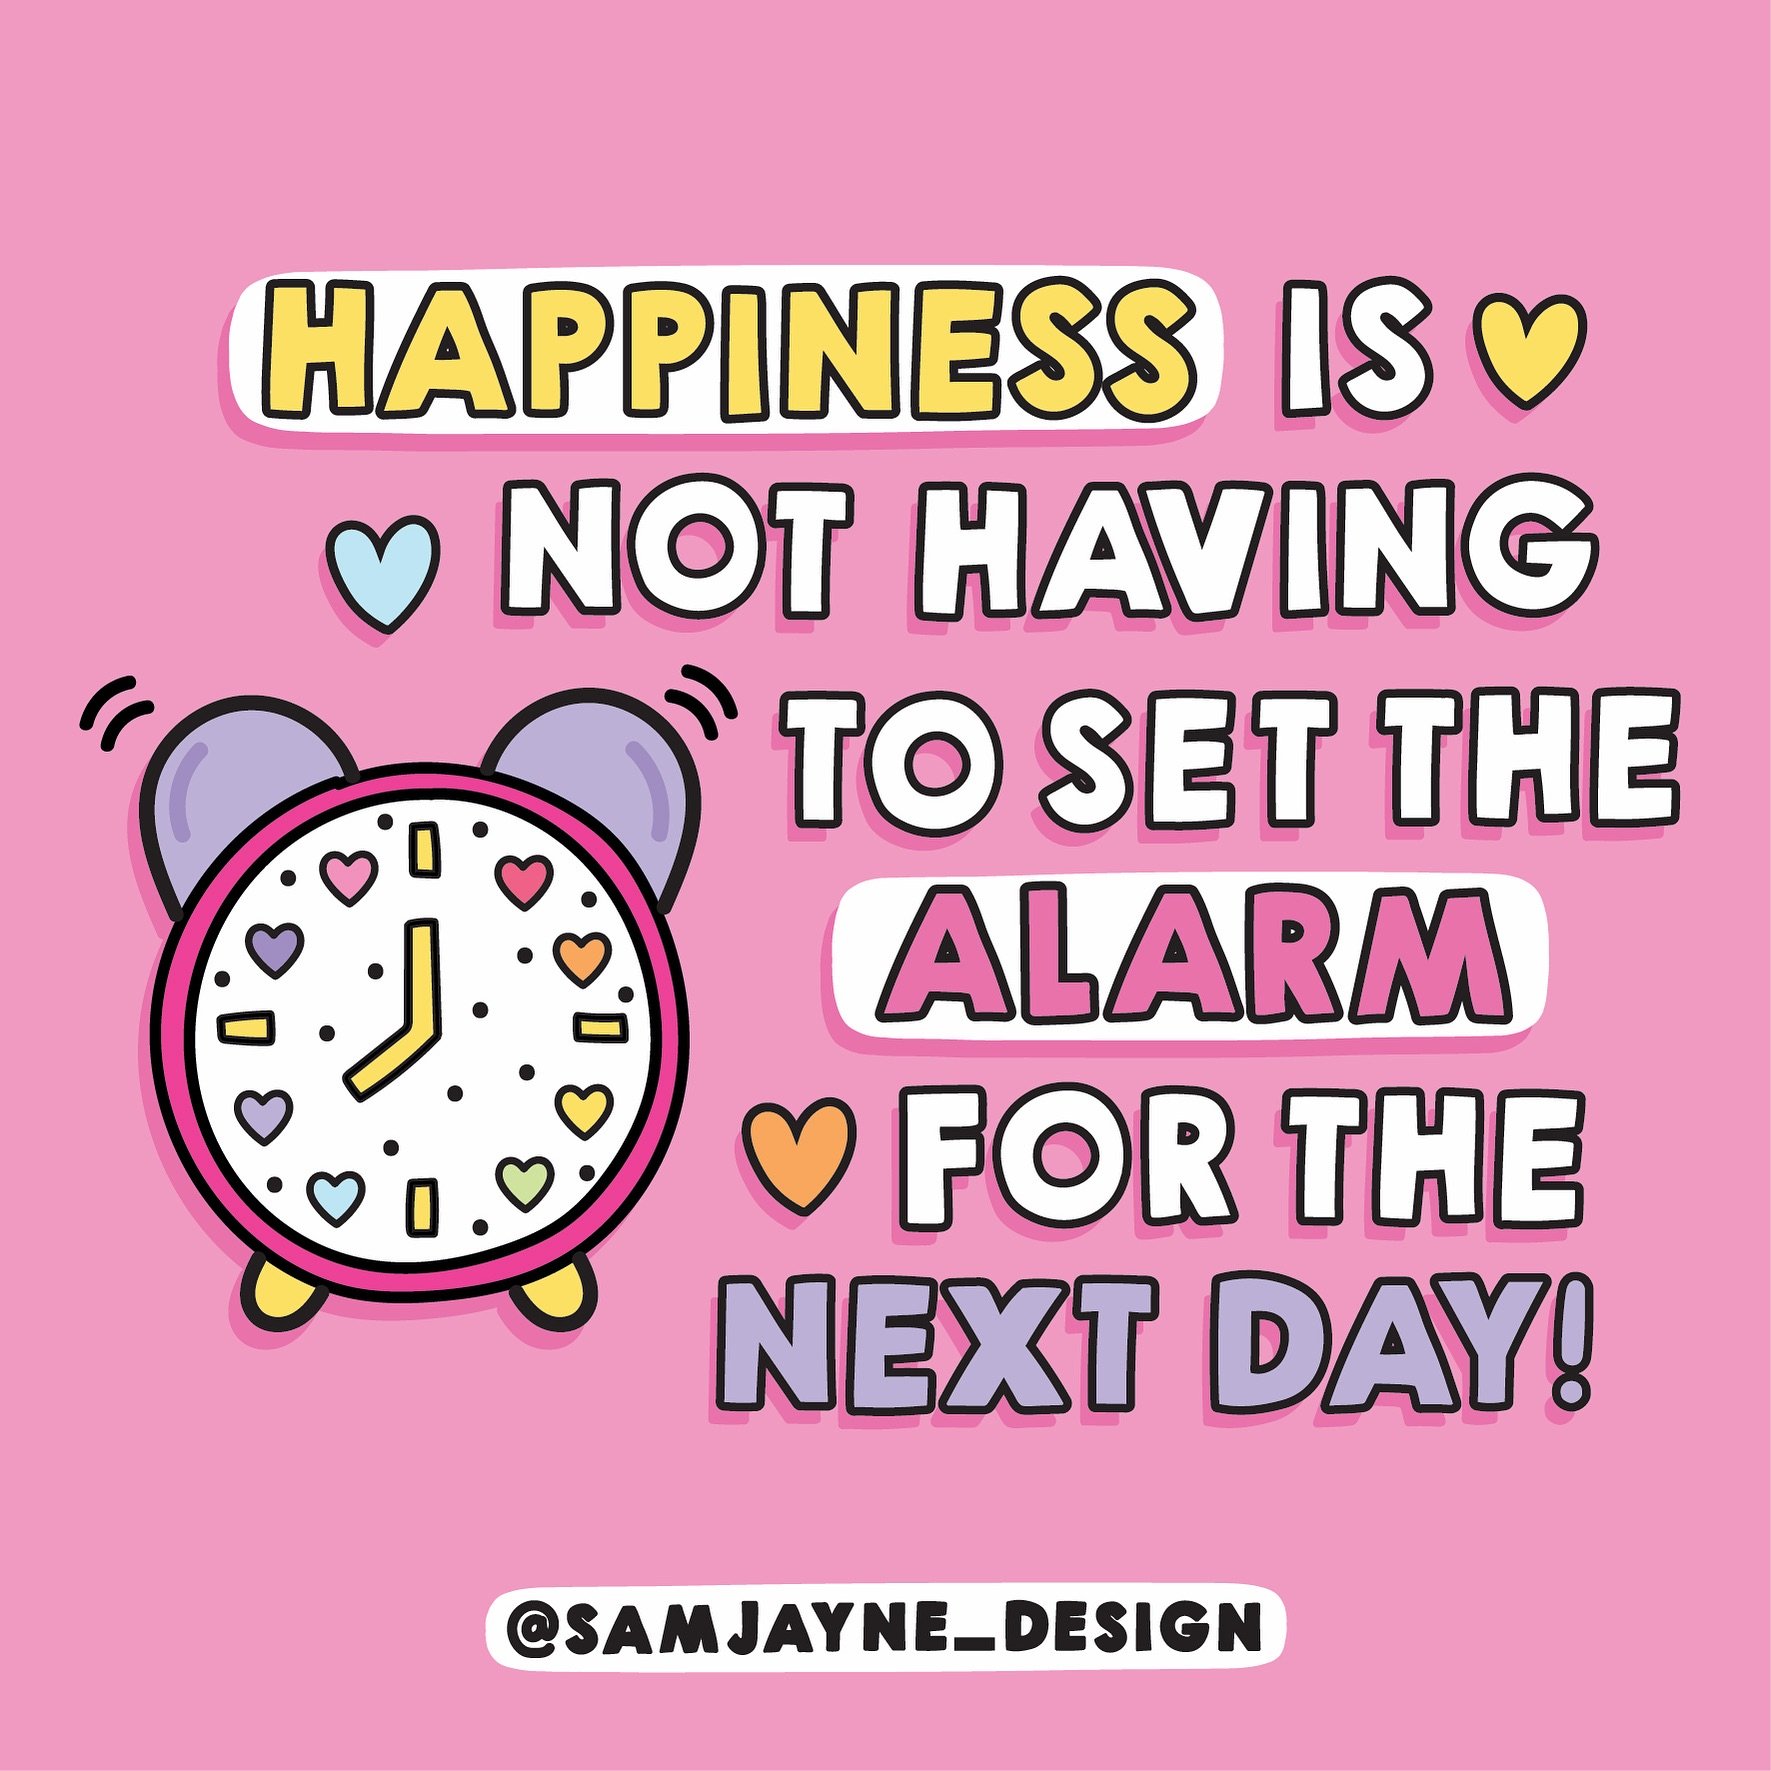 Happy Sunday evening! It&rsquo;s so good that we don&rsquo;t have to set an alarm tomorrow! 🥳🙌🏼 Hope you&rsquo;re all having a lovely weekend so far 😊

#cuteartwork #groovyart #cuteartstyle #brightcolours #goodvibes #handlettering #motivationalar